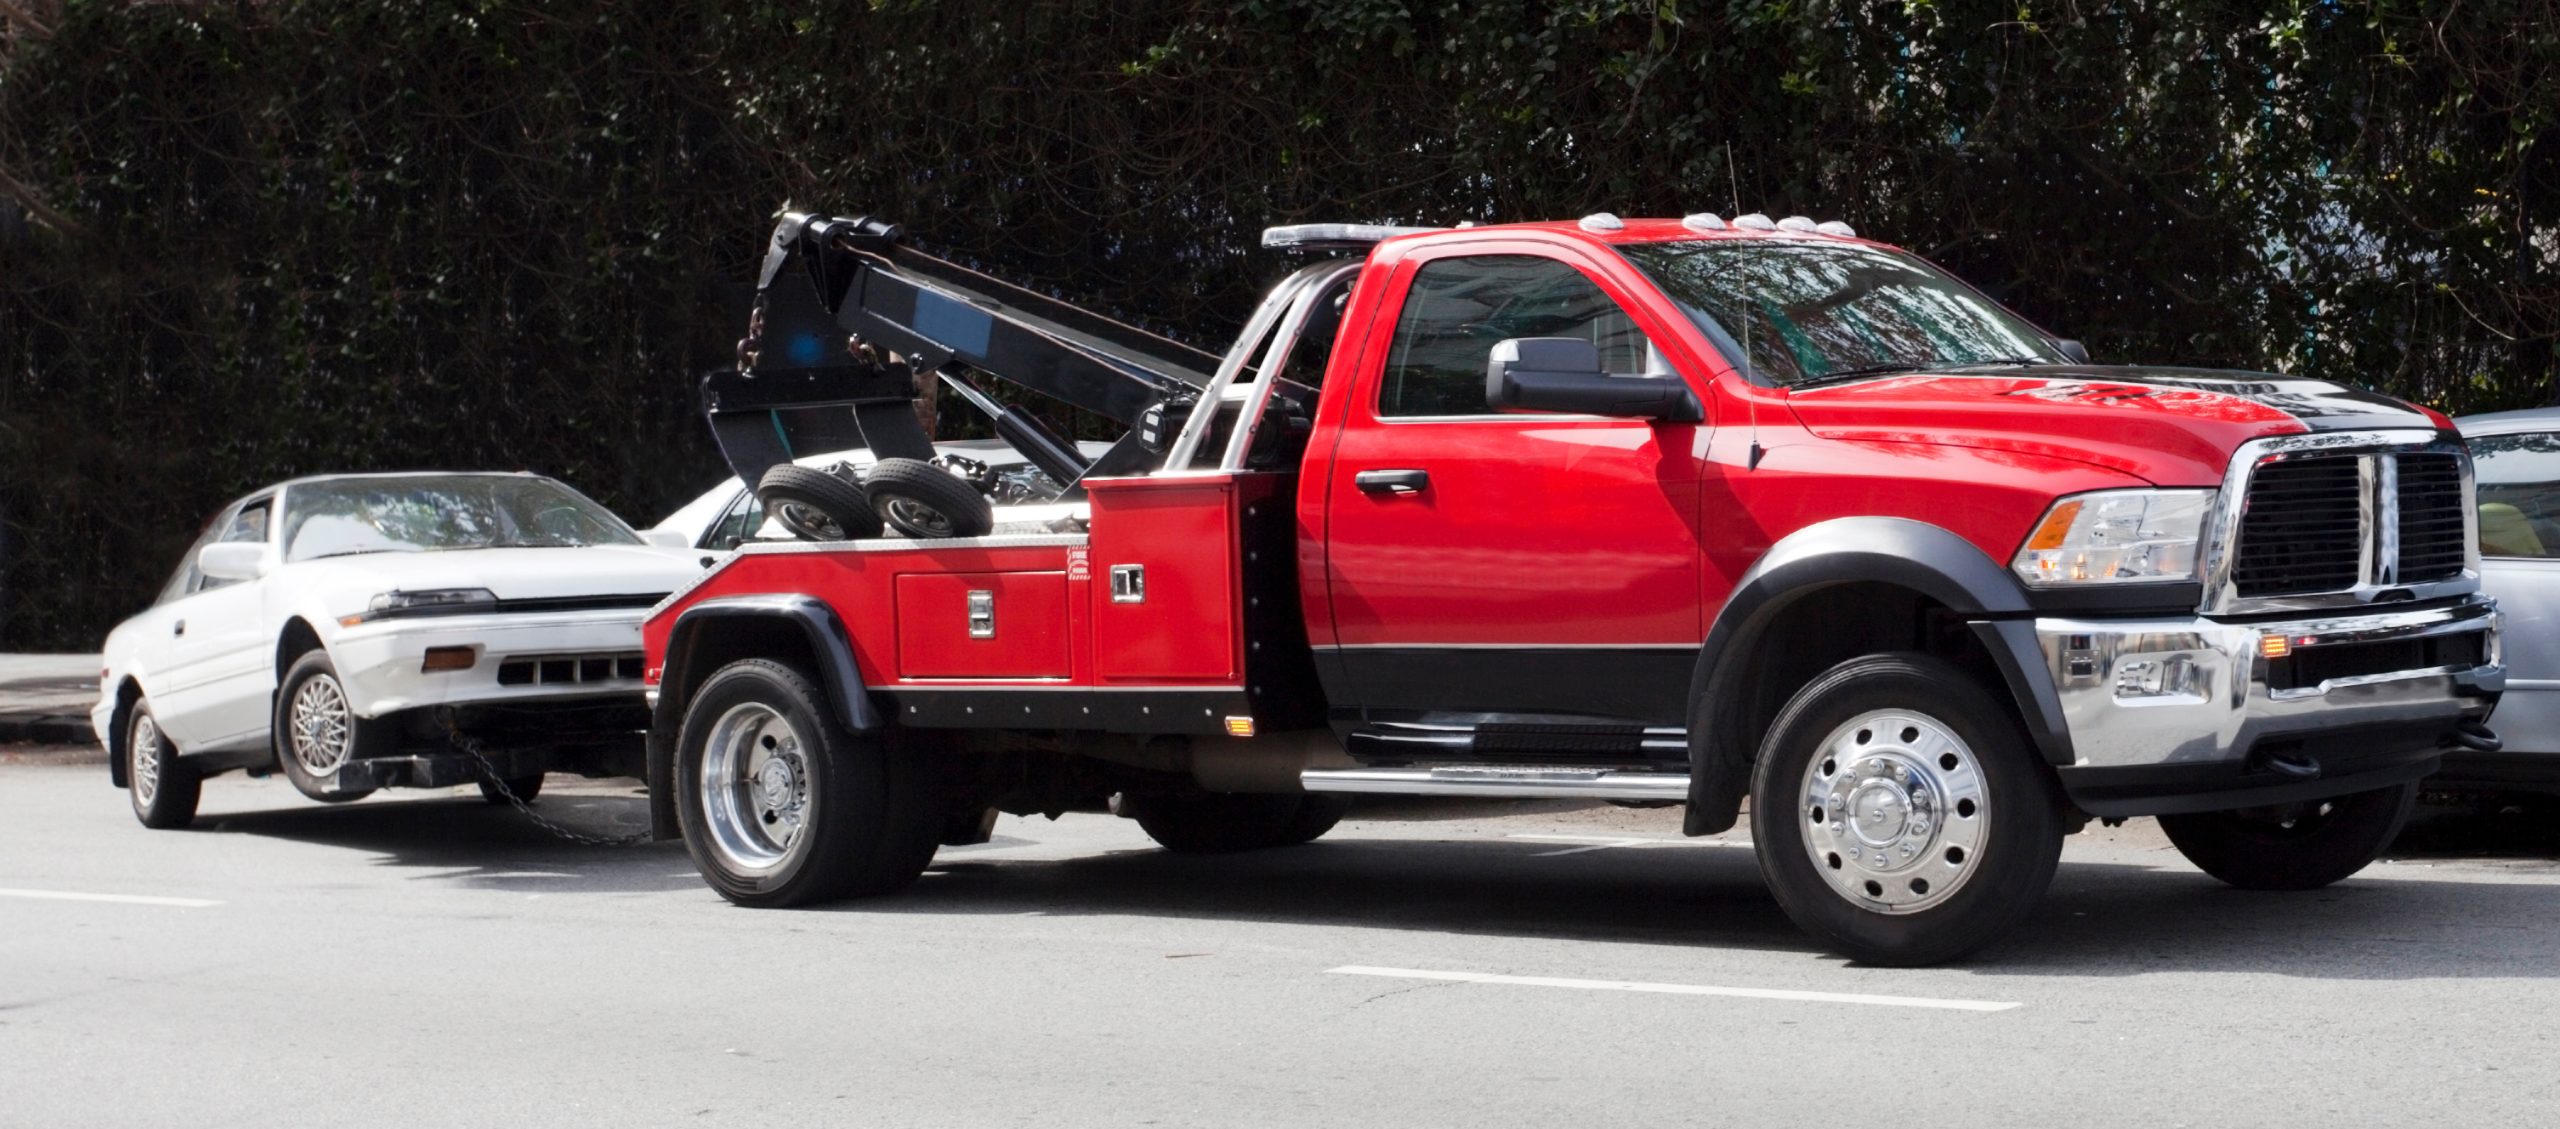 ho-hook insurance coverage necessary, tow truck business
